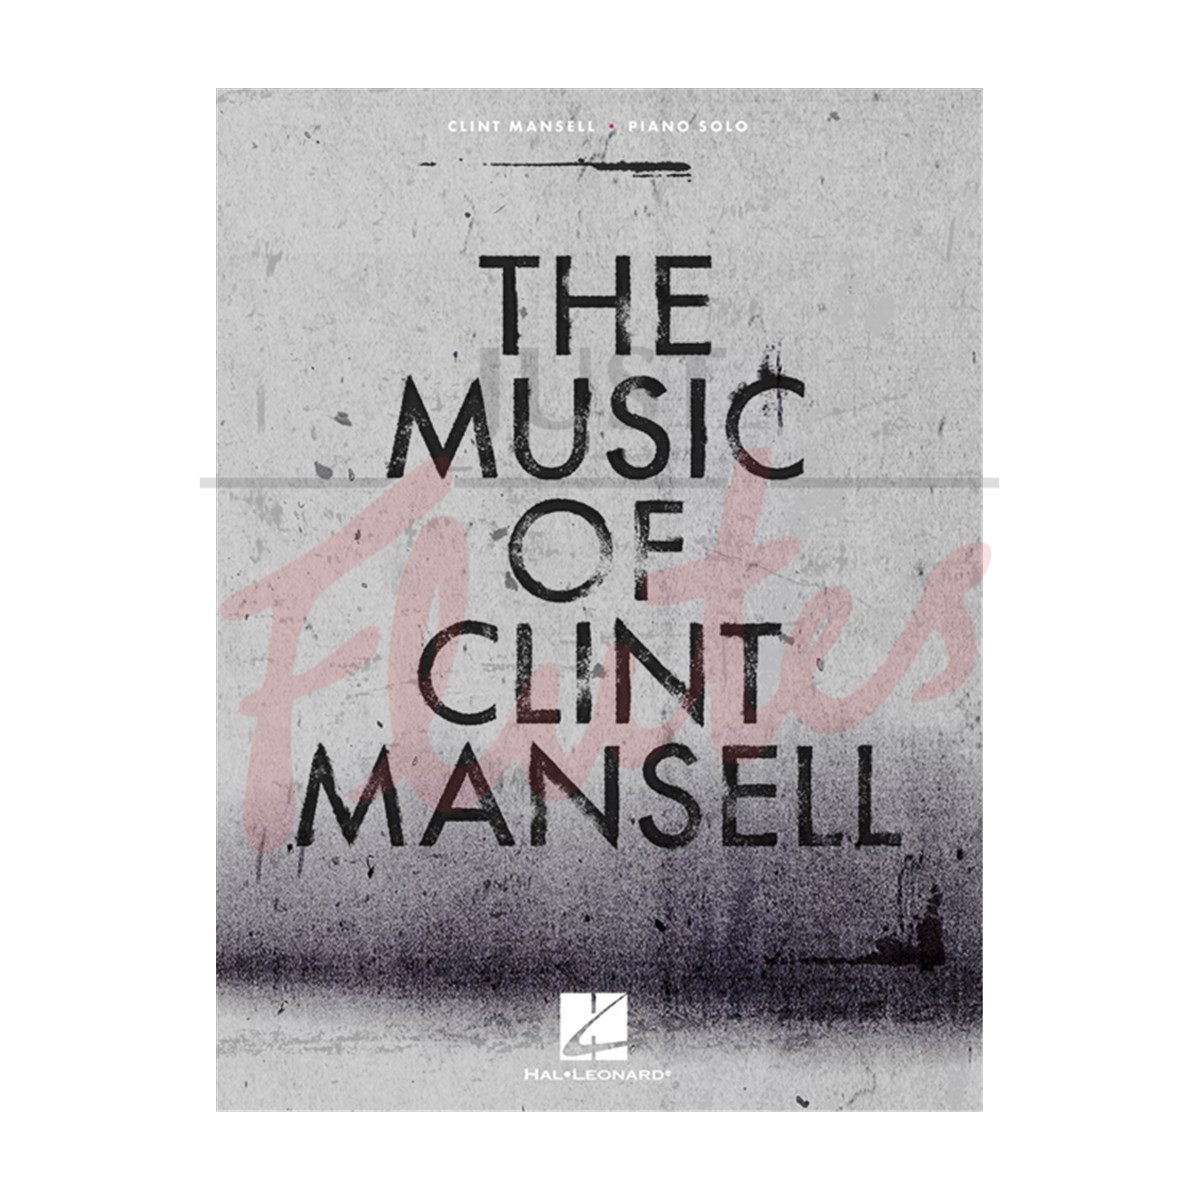 The Music of Clint Mansell for Piano Solo